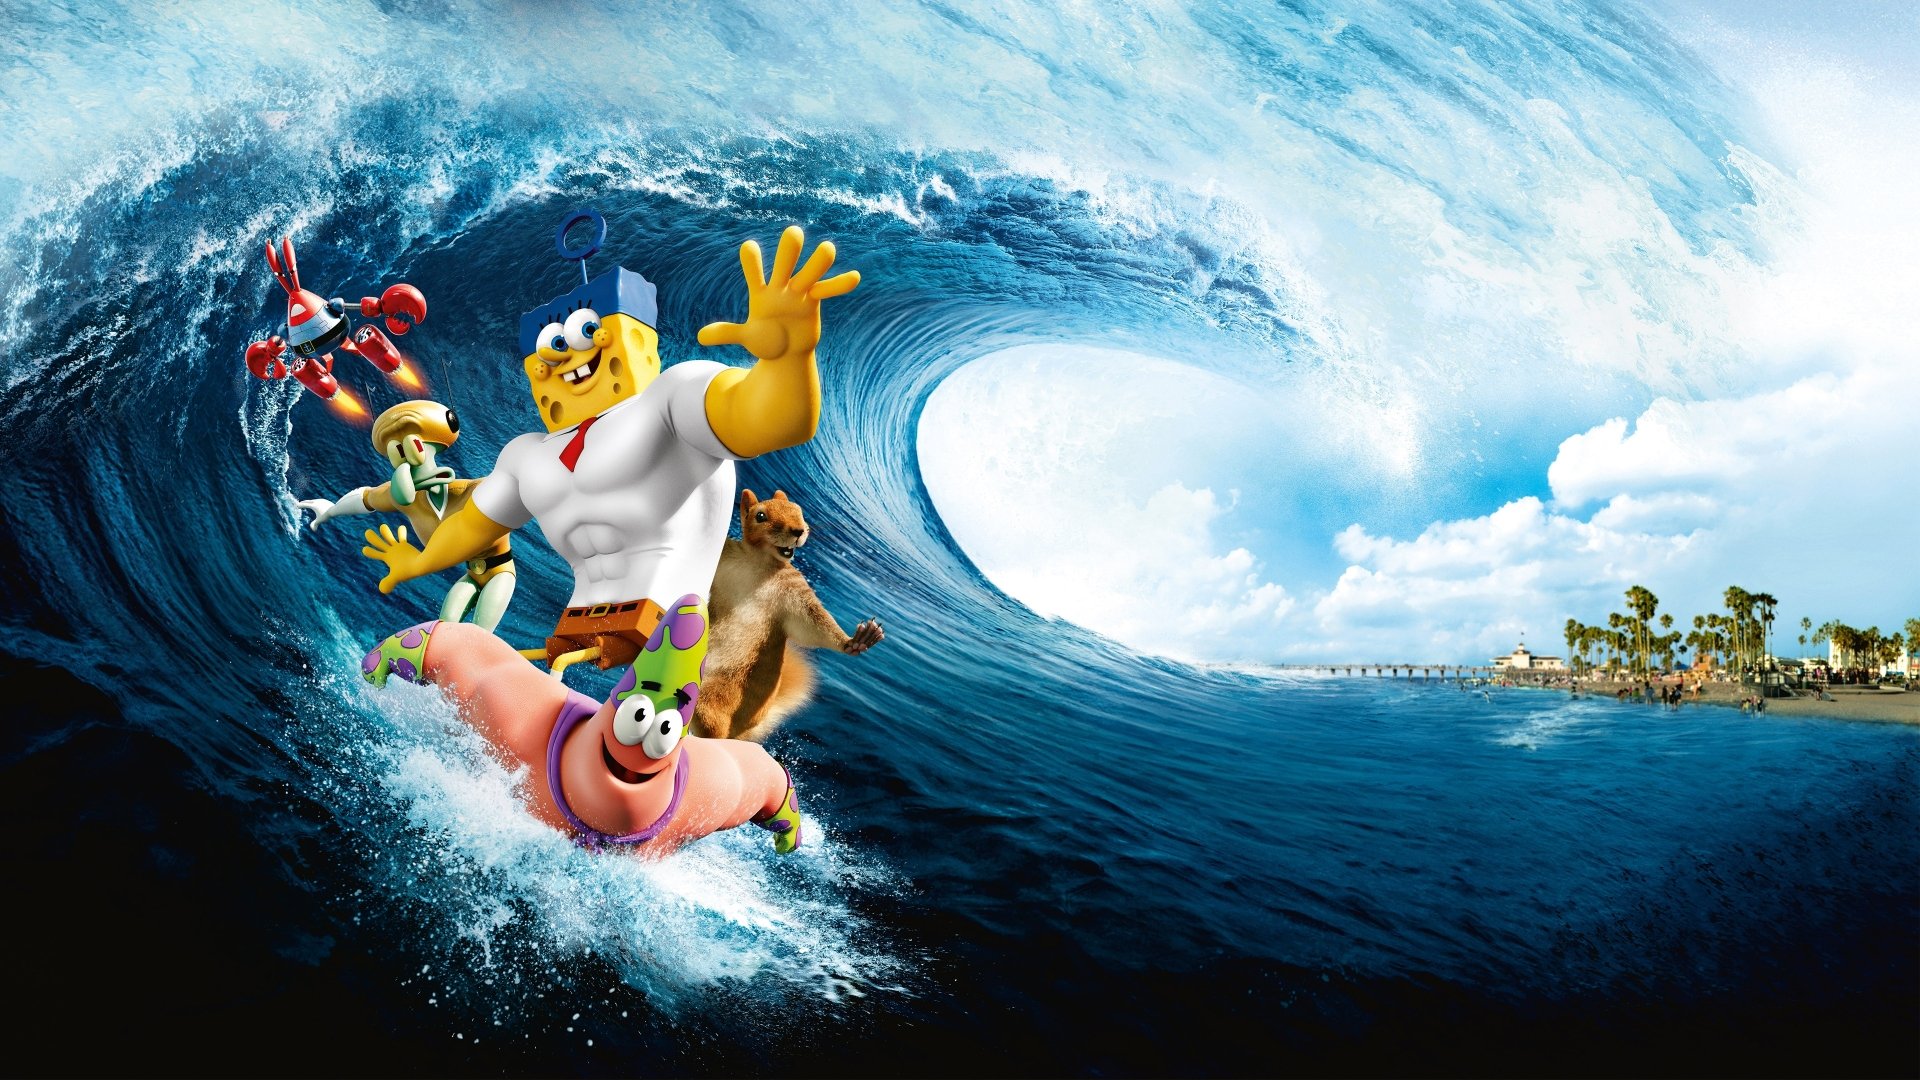 the spongebob movie sponge out of water video game